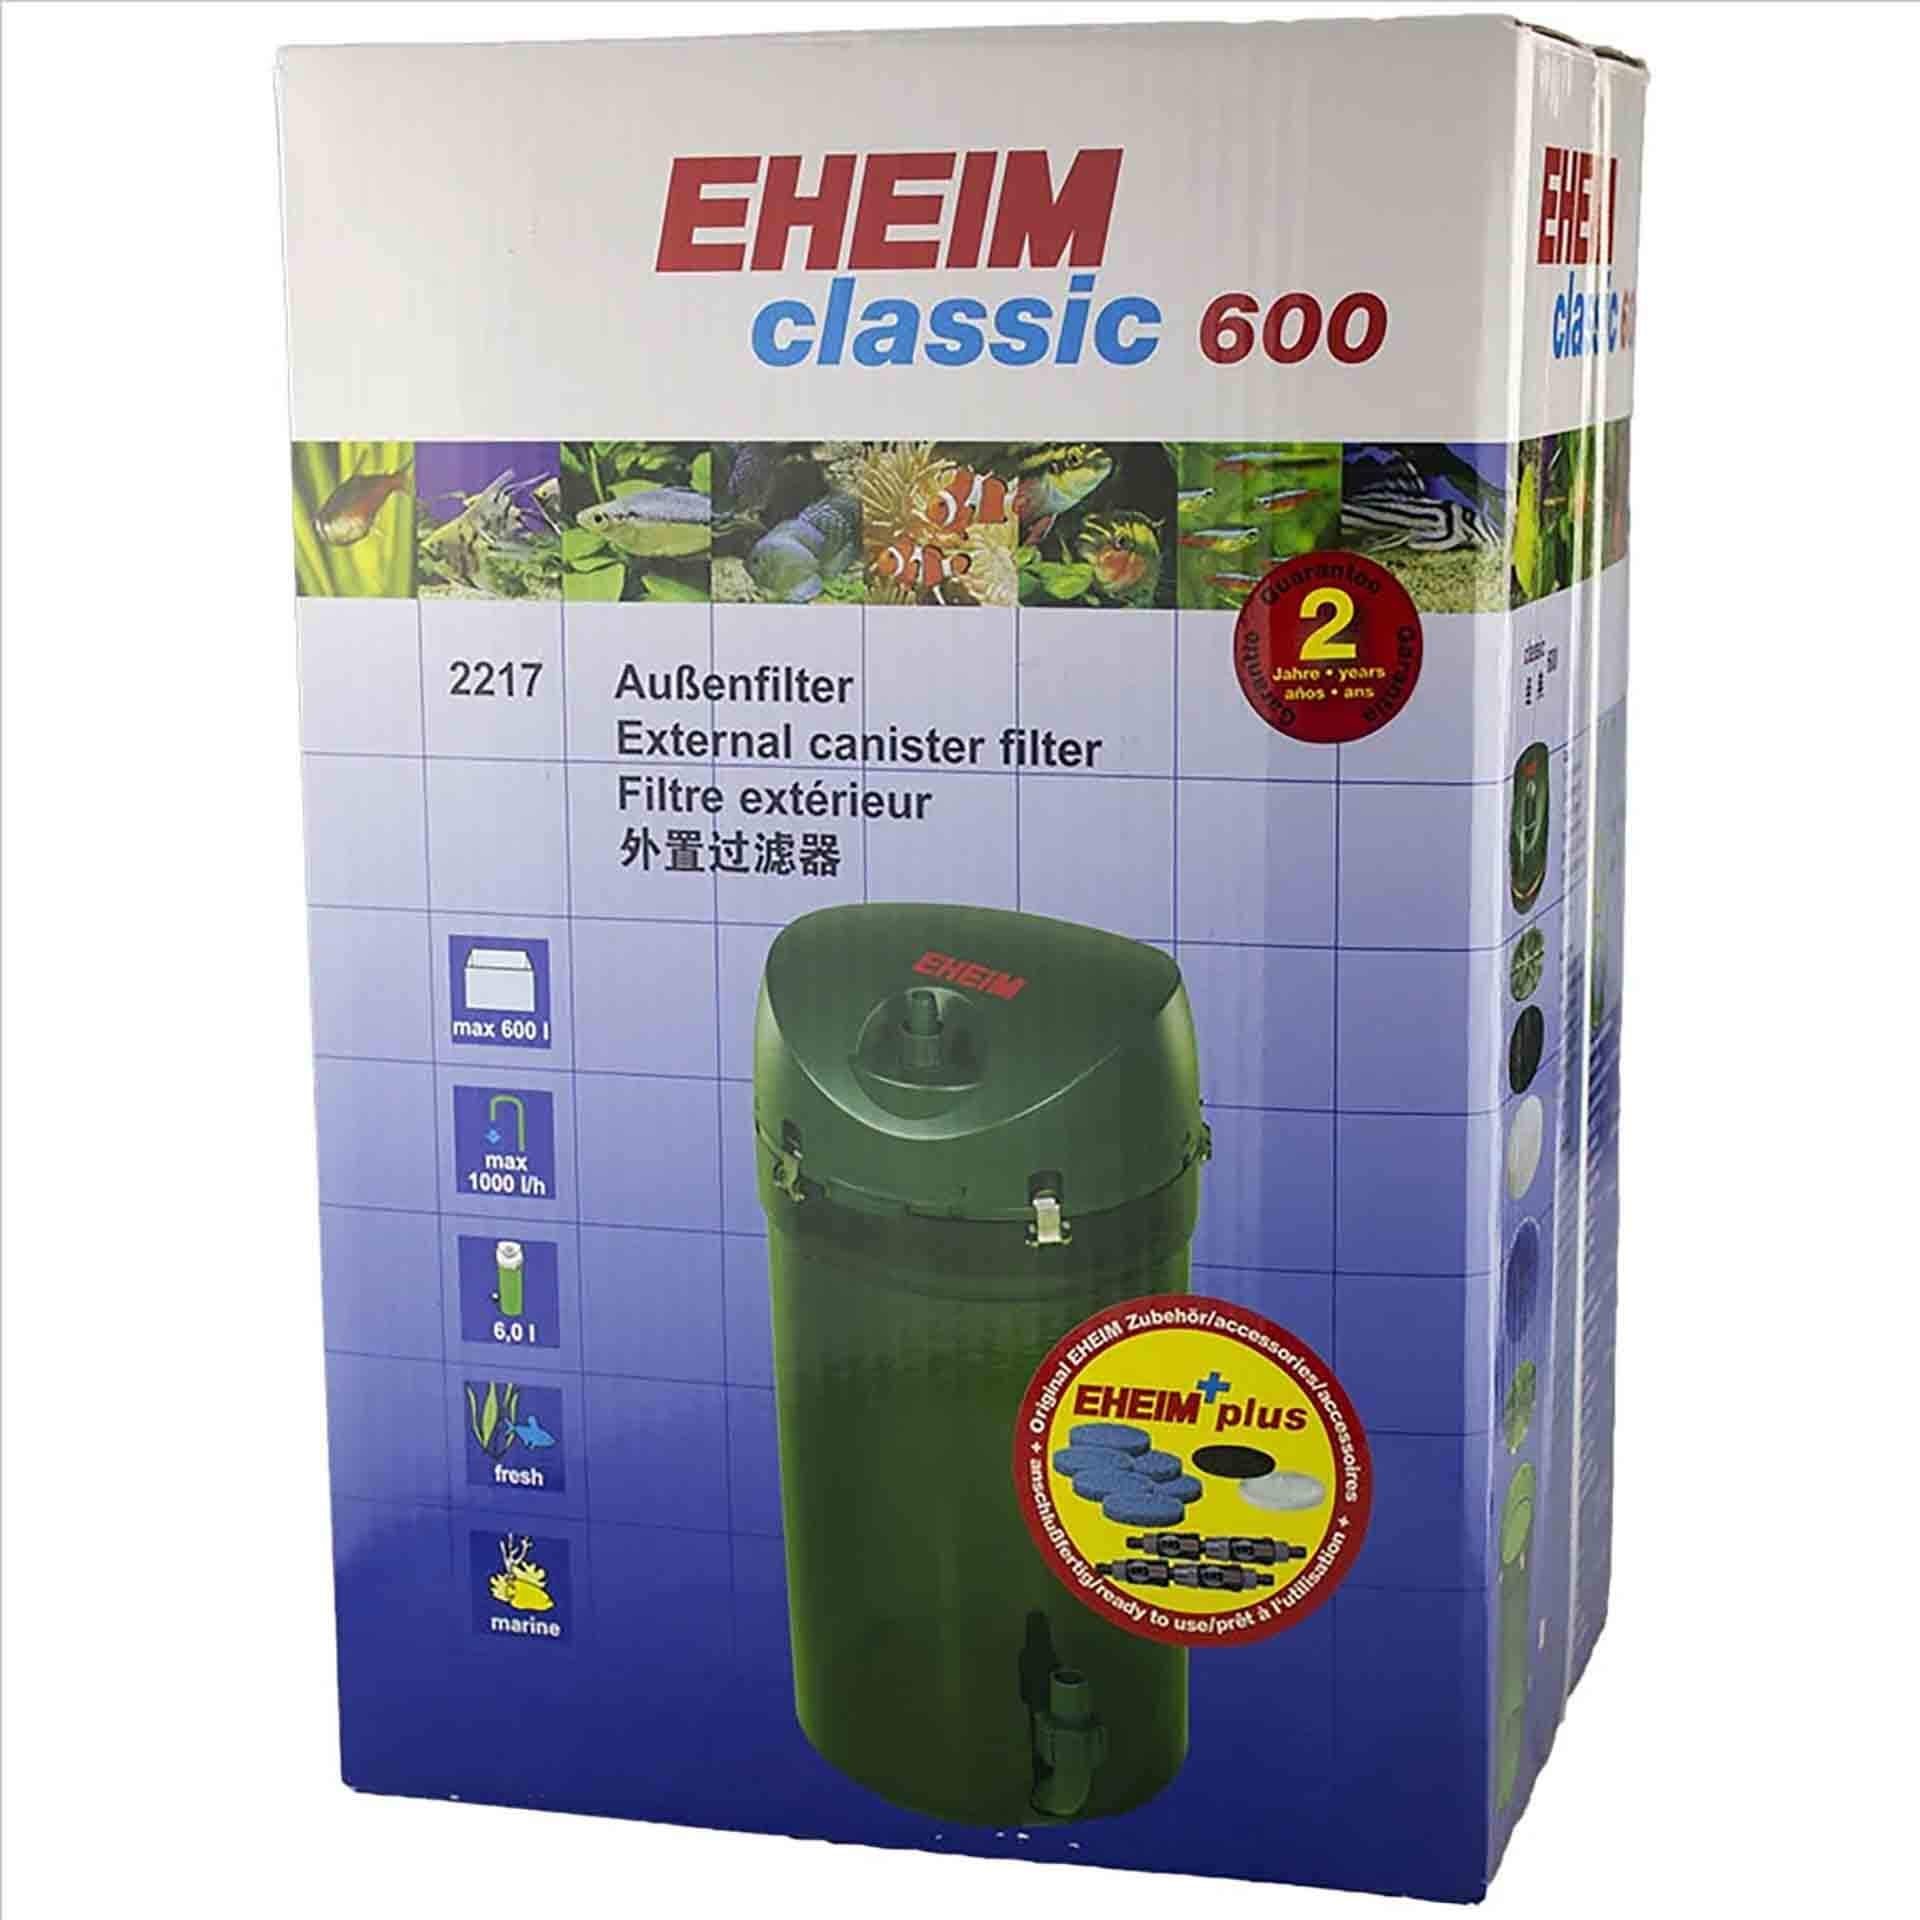 Eheim Classic 600 - 2217 (With Sponge and Bio Media) Canister Filter